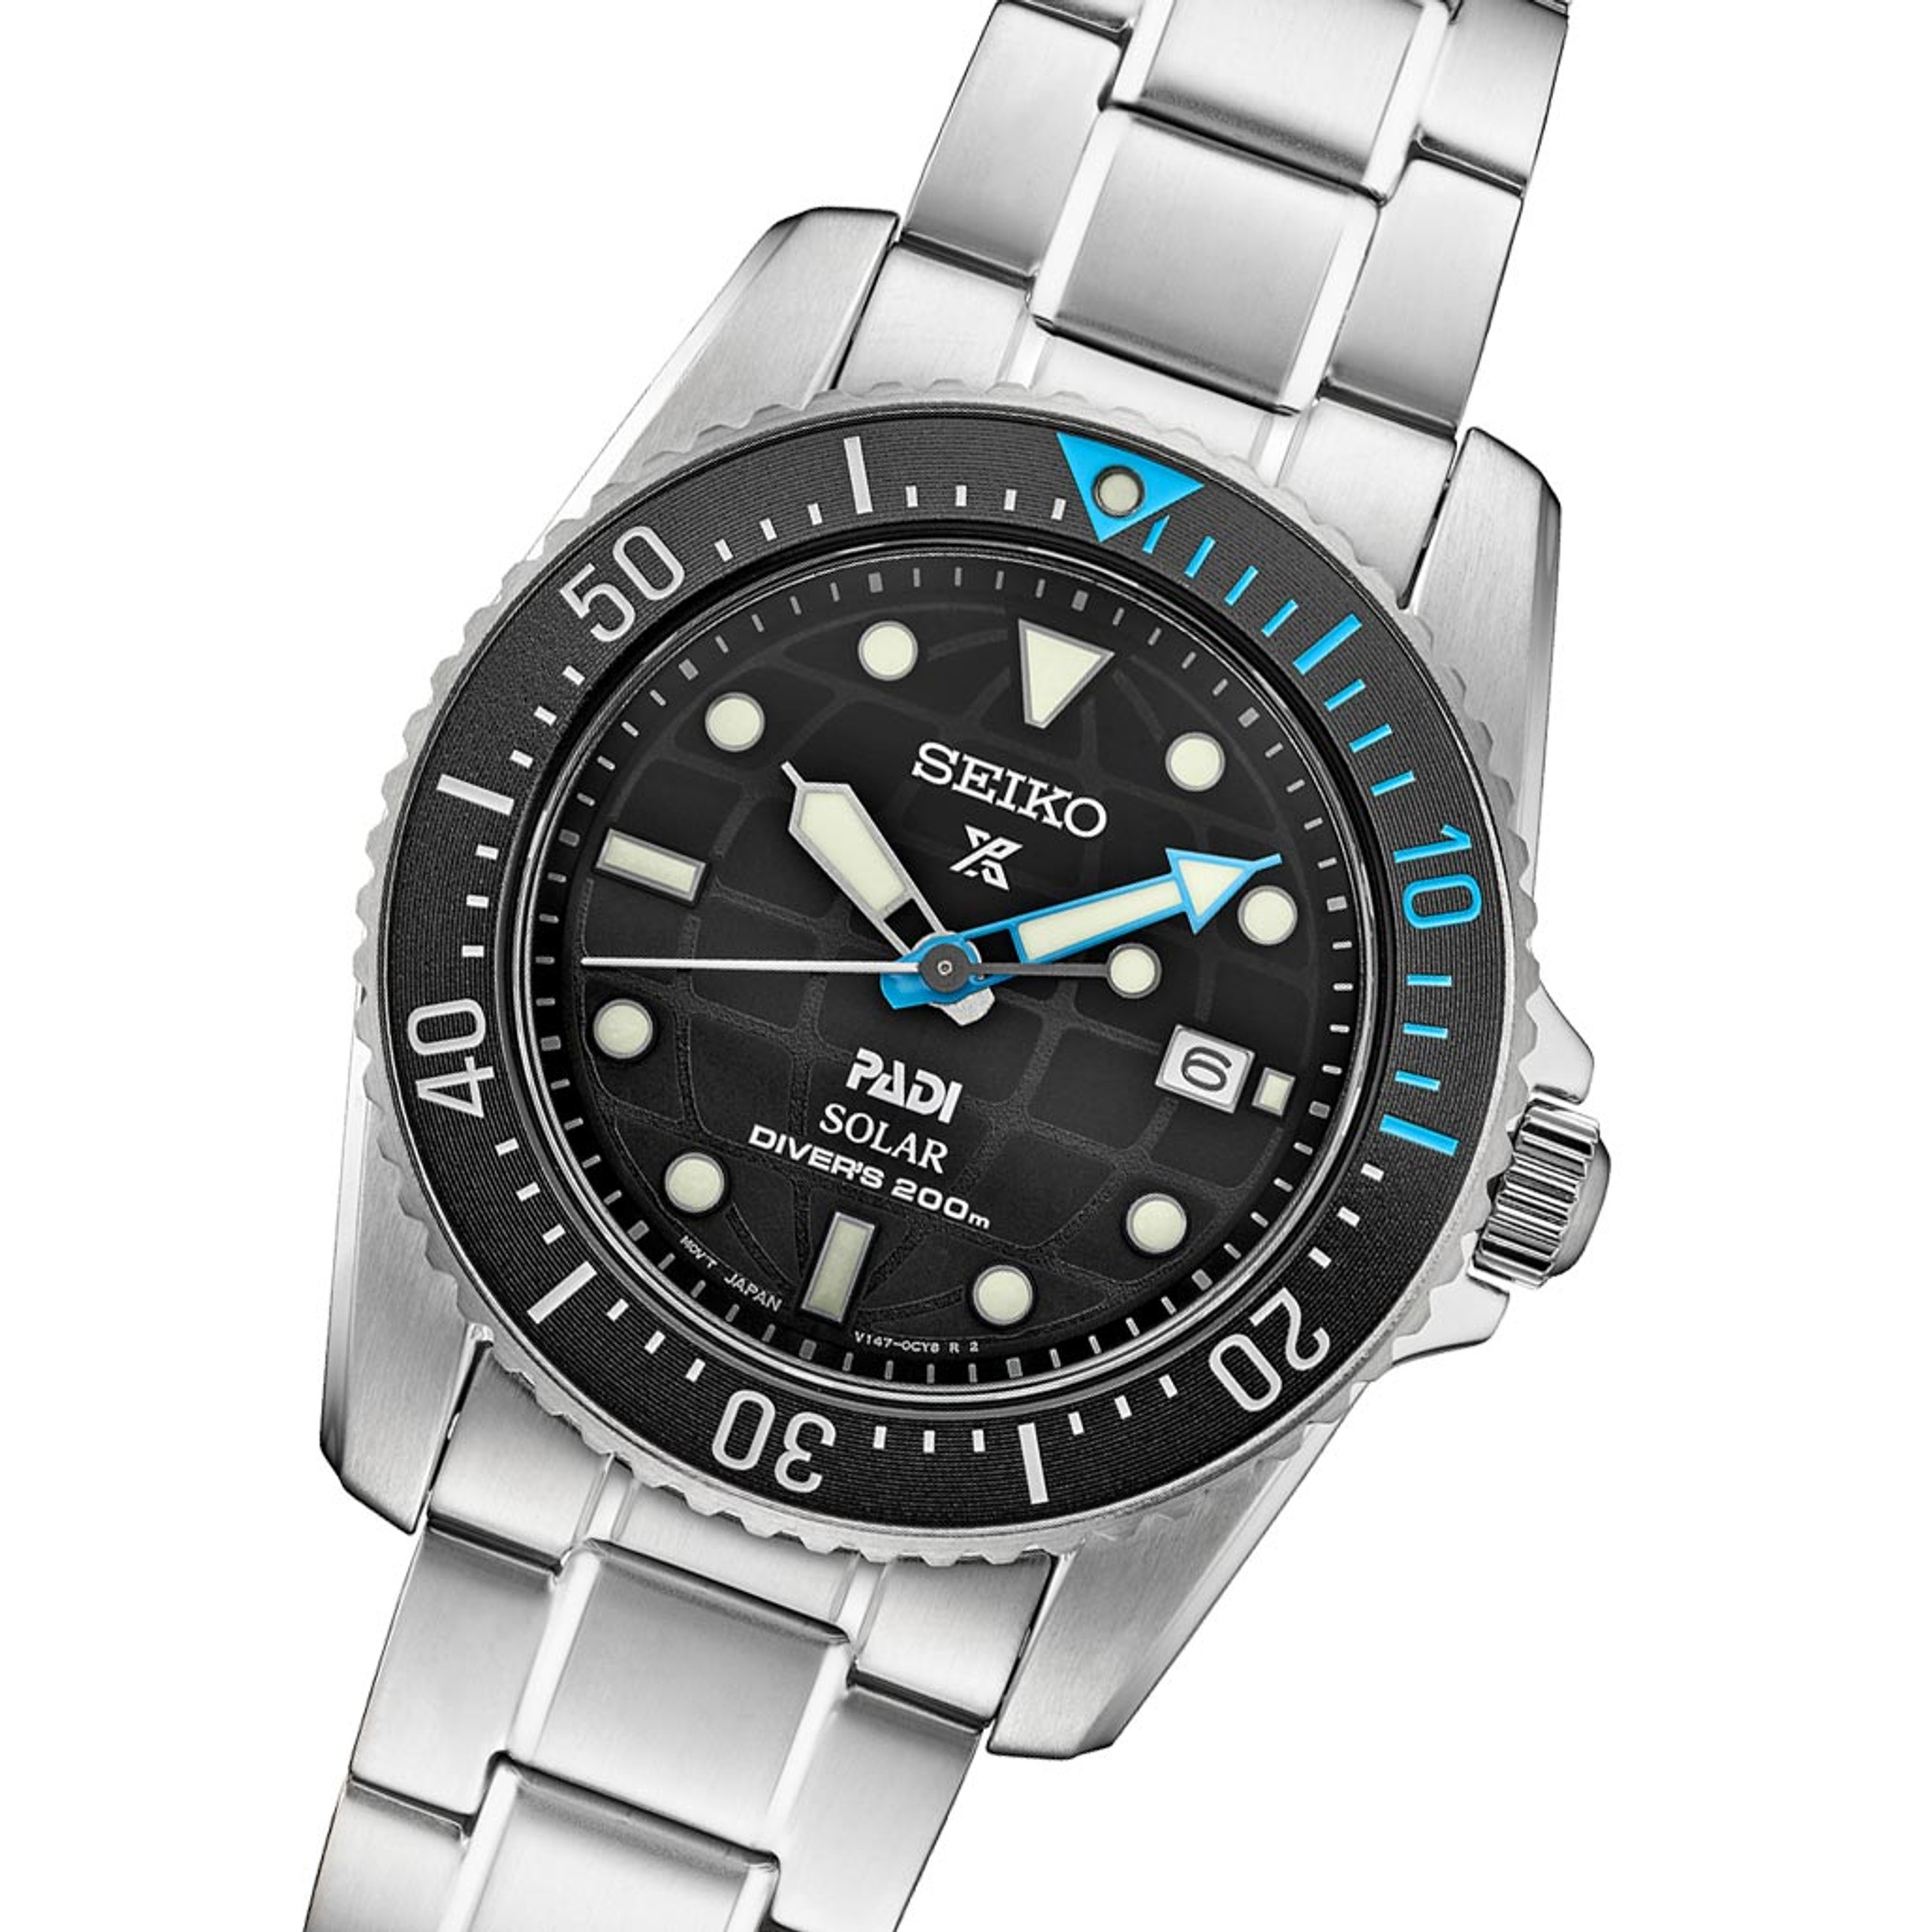 Seiko 38mm Prospex PADI Edition, Solar Dive Watch with Stainless Steel ...